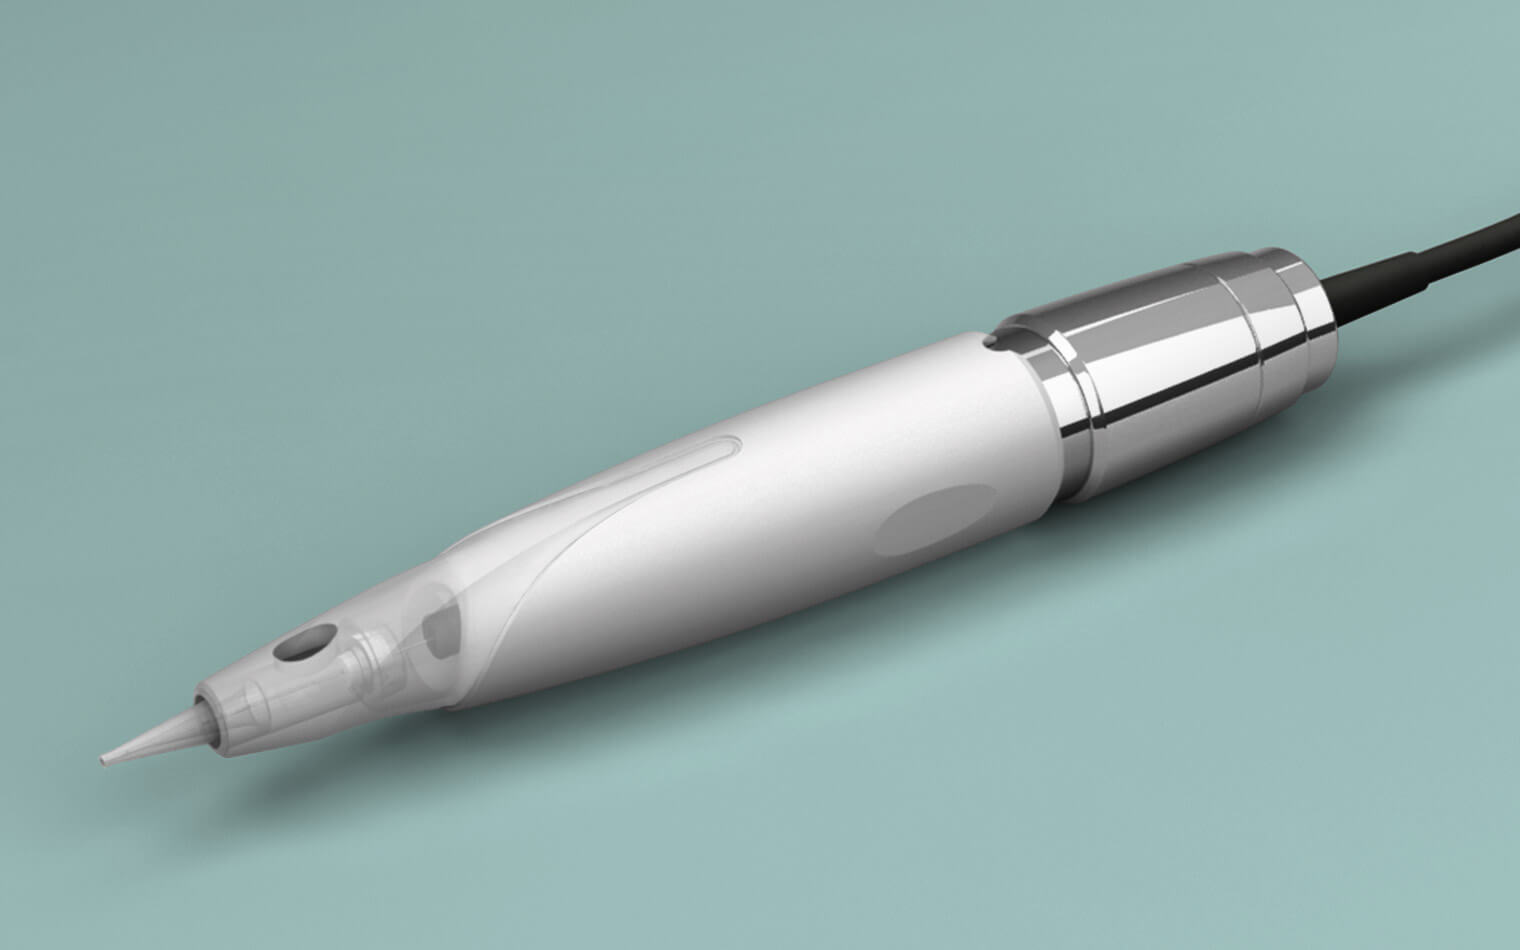 This picture shows the Tattoo-Pen from an oblique top view.